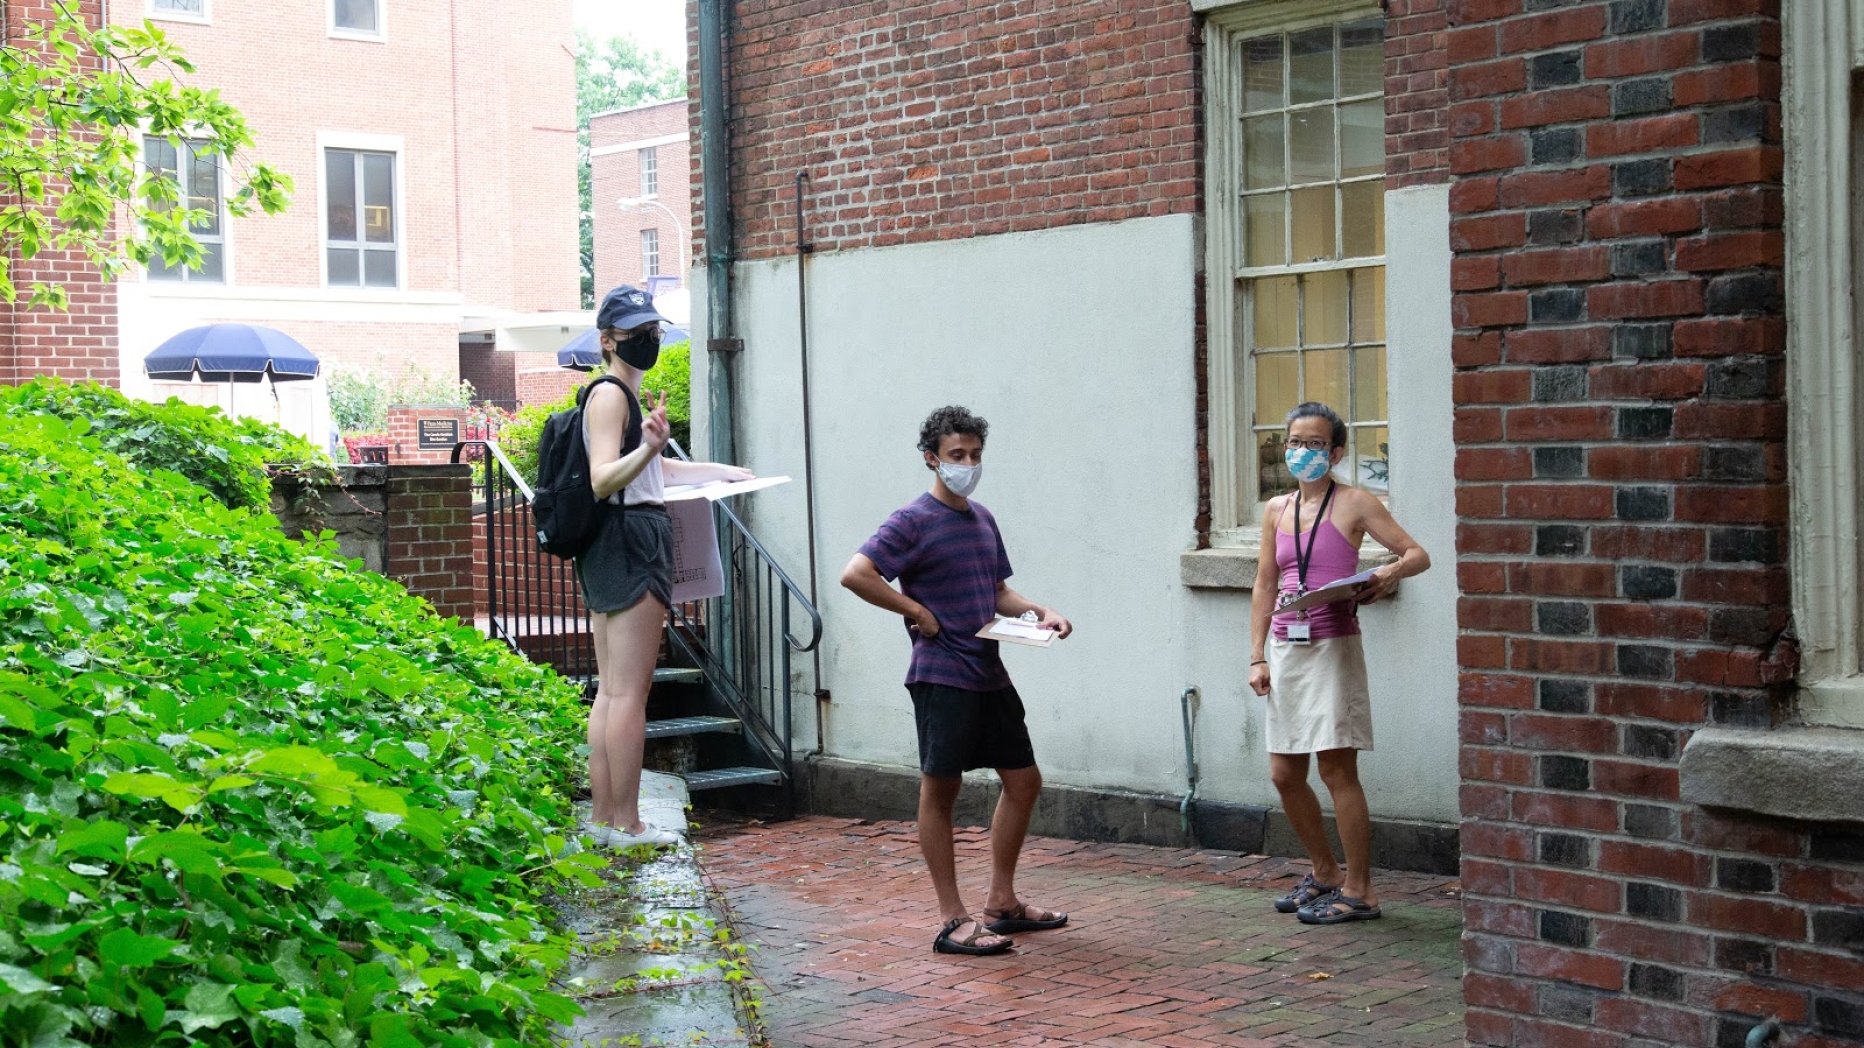 Three researchers with clipboards, masked and distanced, face the camera posed against a brick building